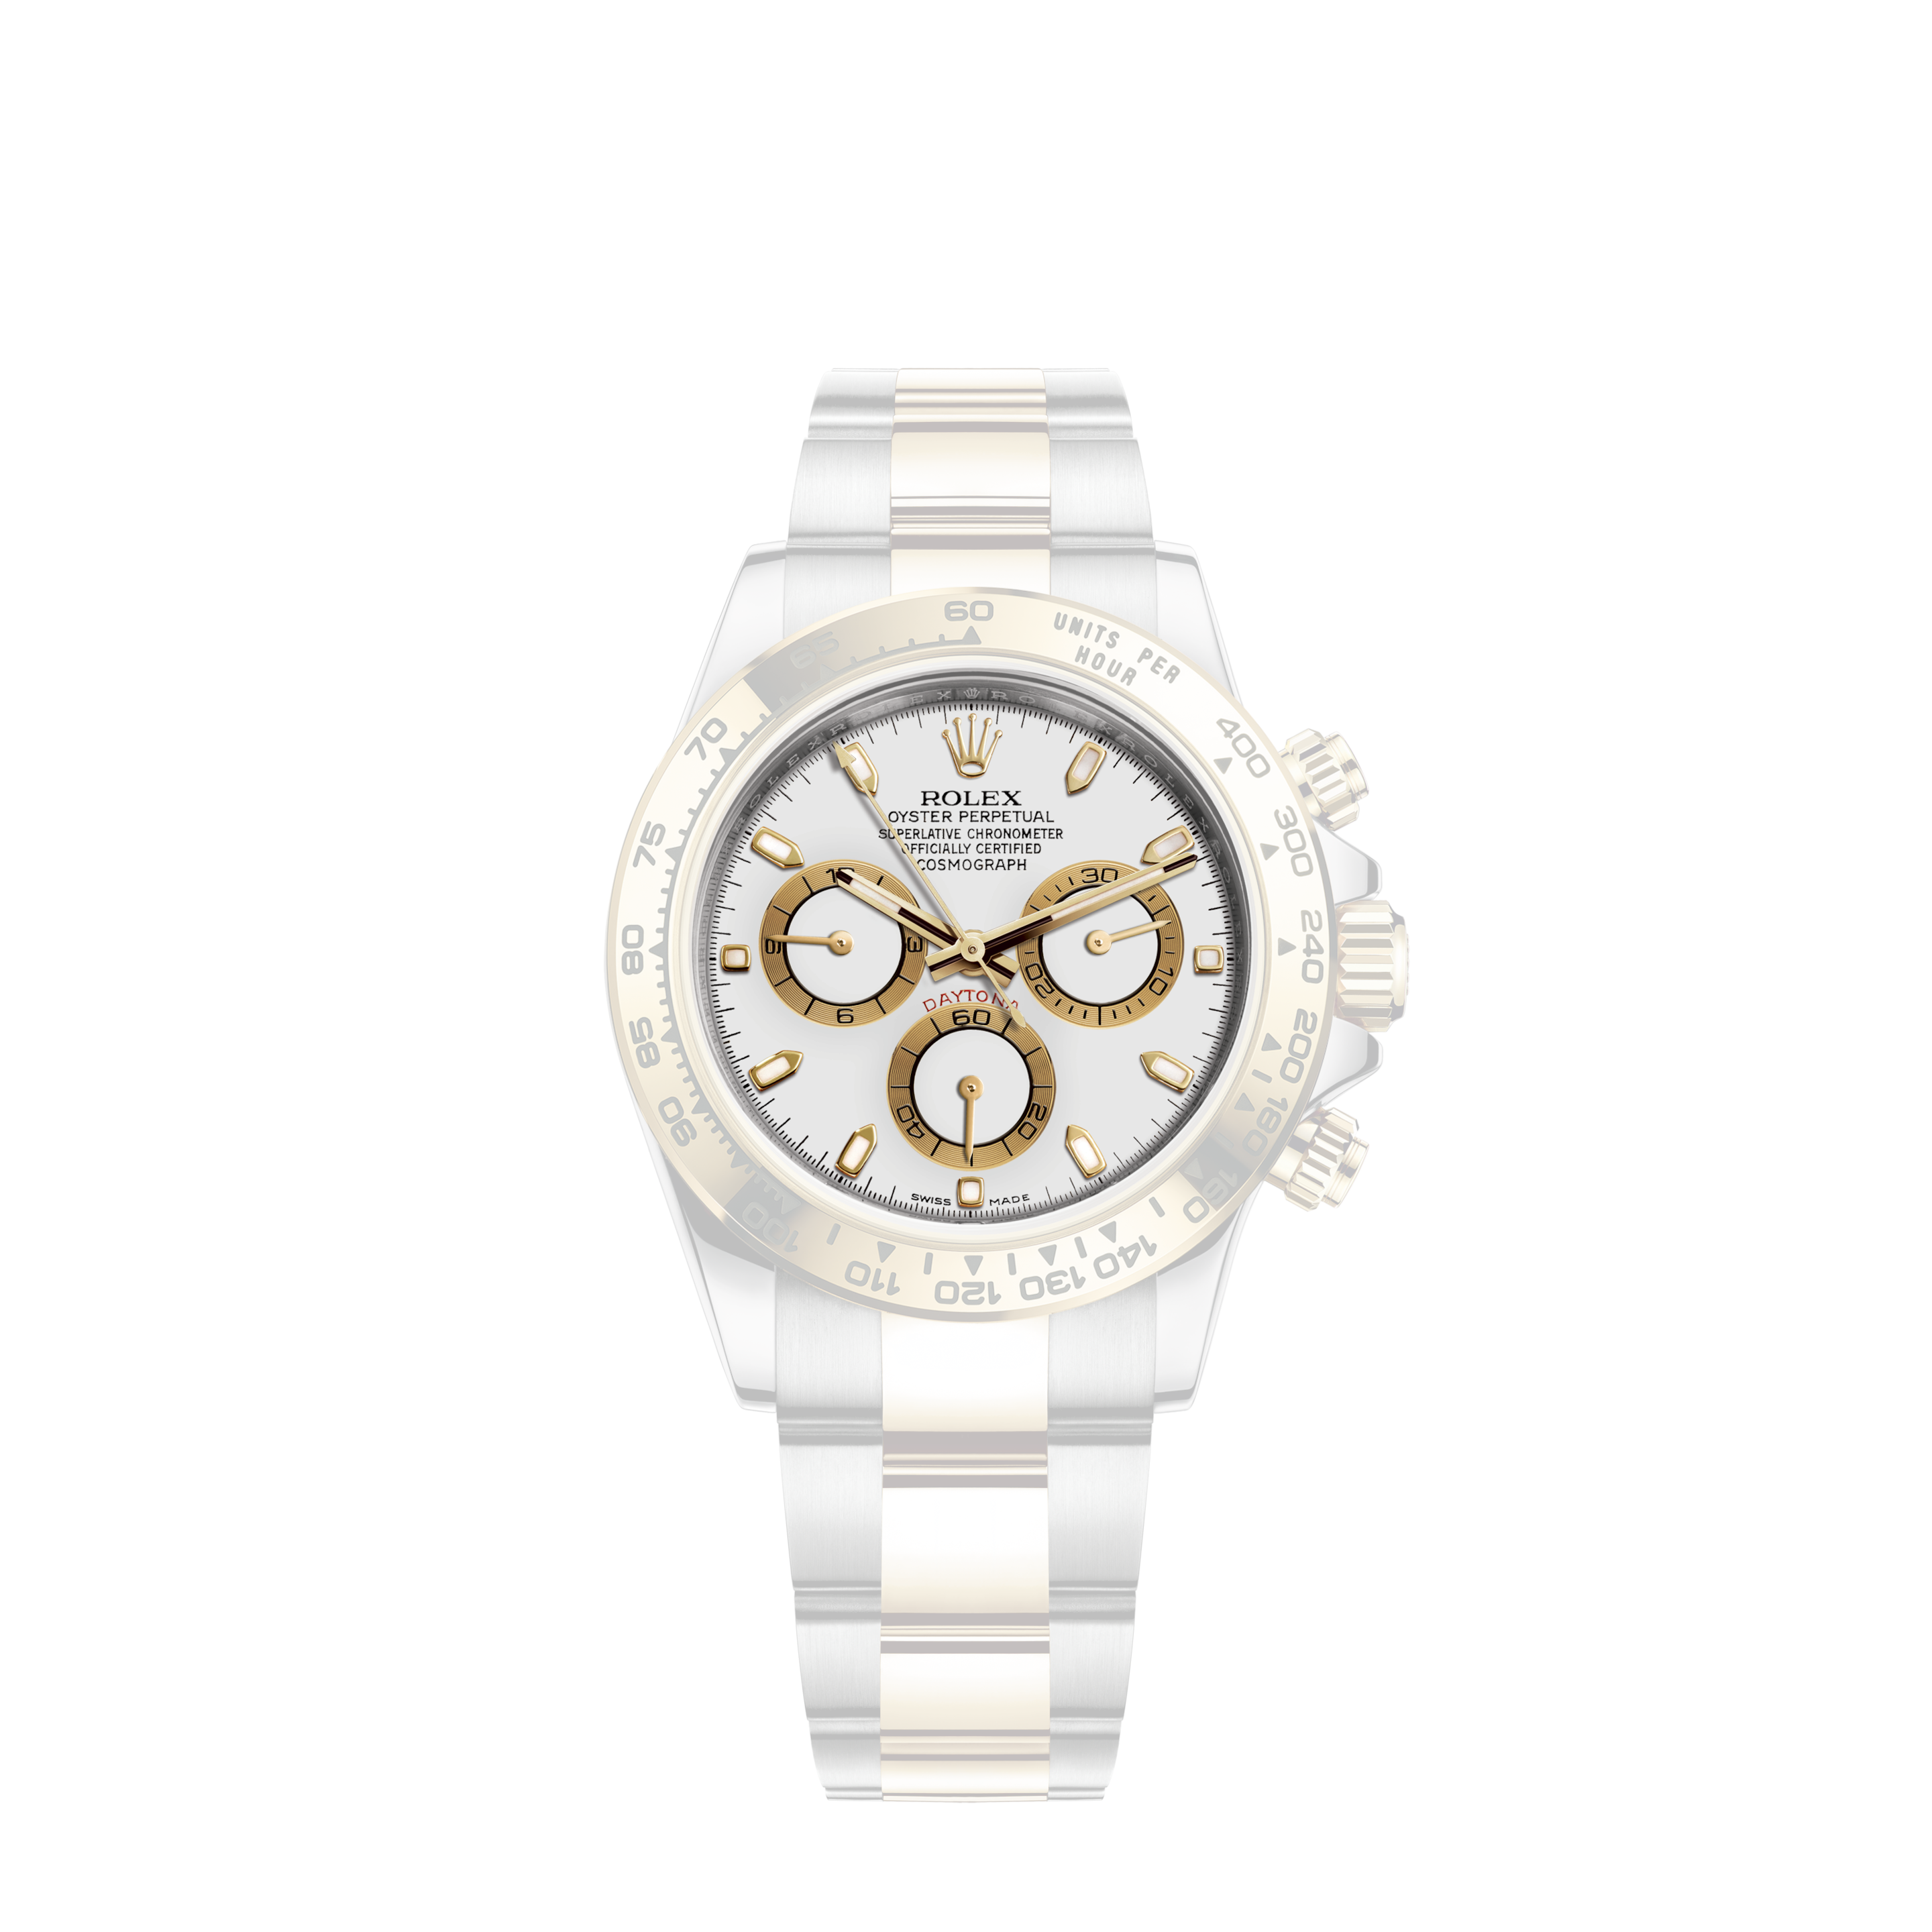 Rolex Presidential Day-Date 41mm White Gold W/Diamond Paved Dial 218349Rolex 31mm Datejust With custom Diamond bezel Pink Flower MOP Mother of Pearl Dial Bezel and Lugs Baguette Deployment buckle